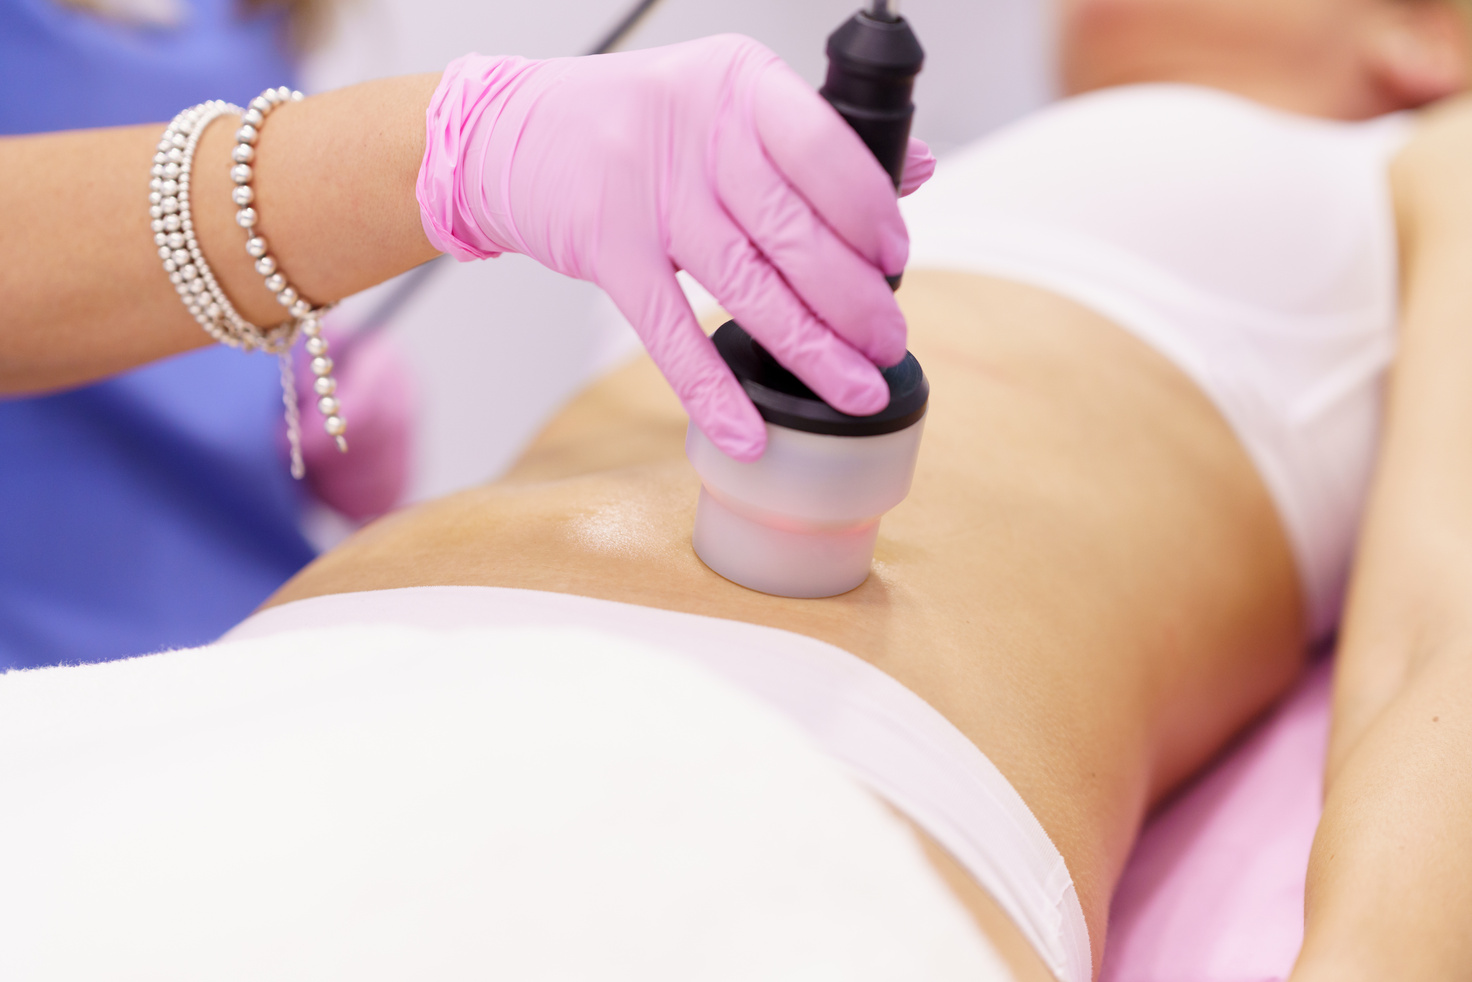 Woman Getting Body Contouring Treatment